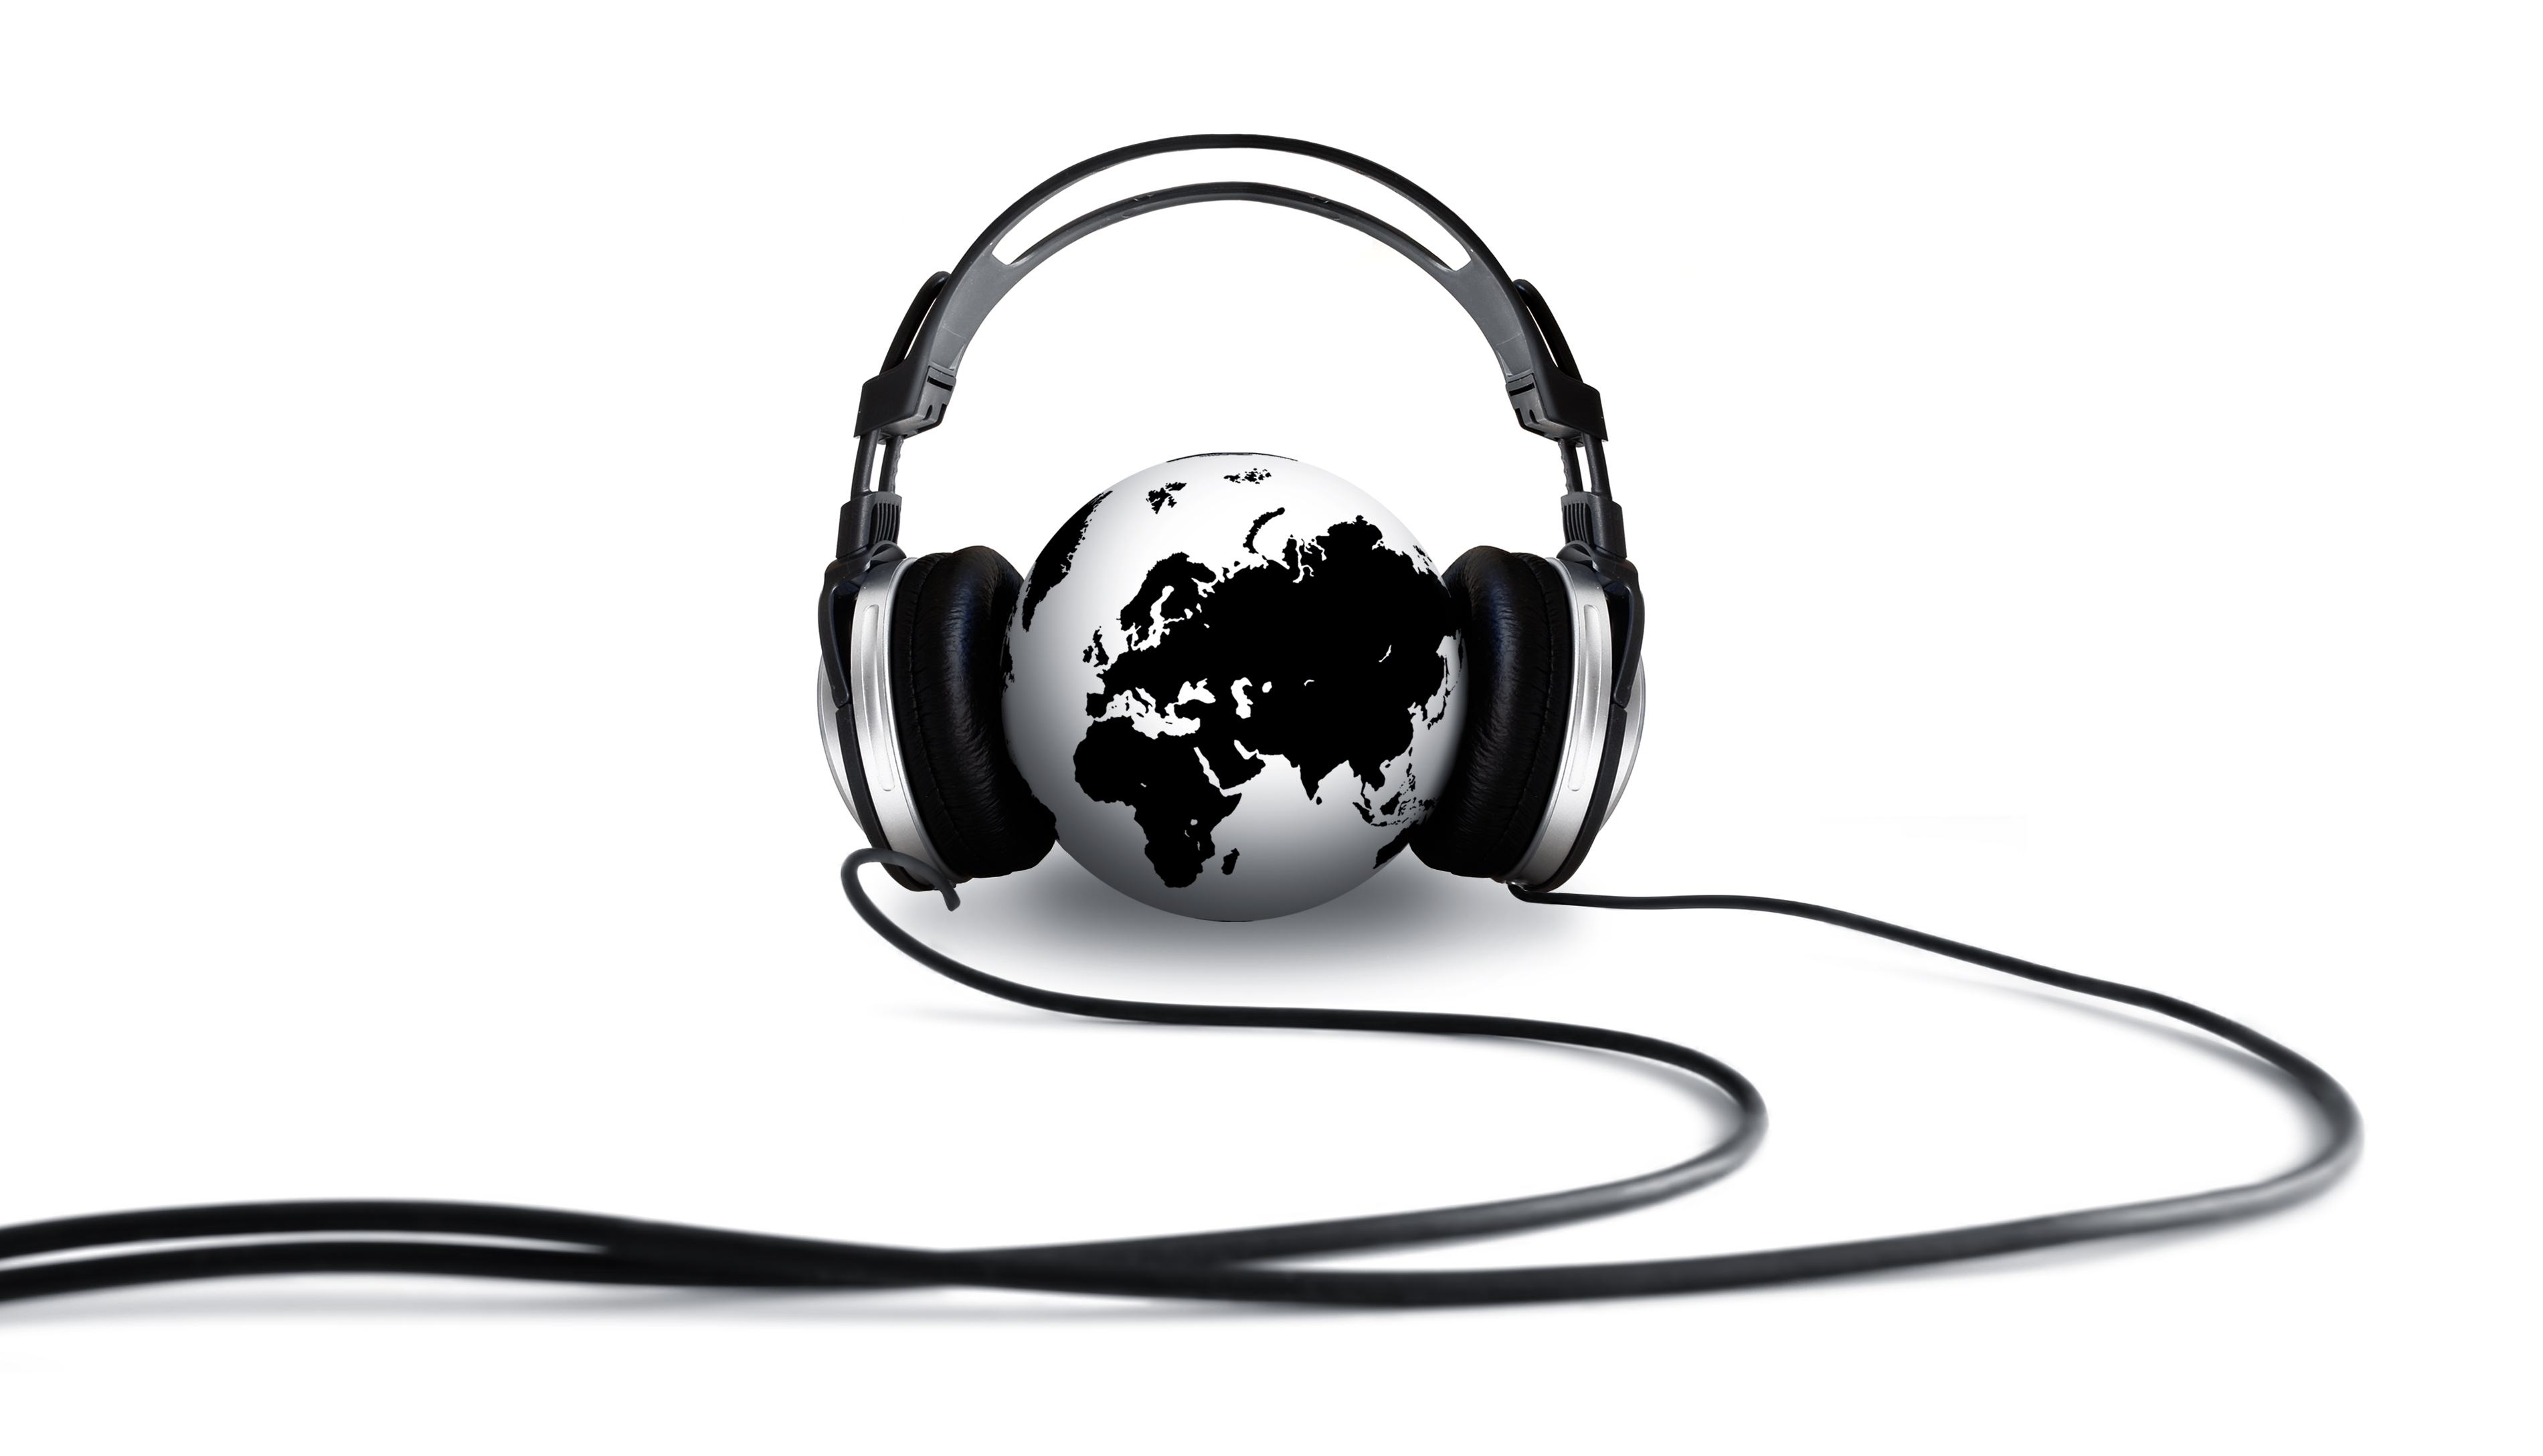 A pair of headphones wrapped around the globe